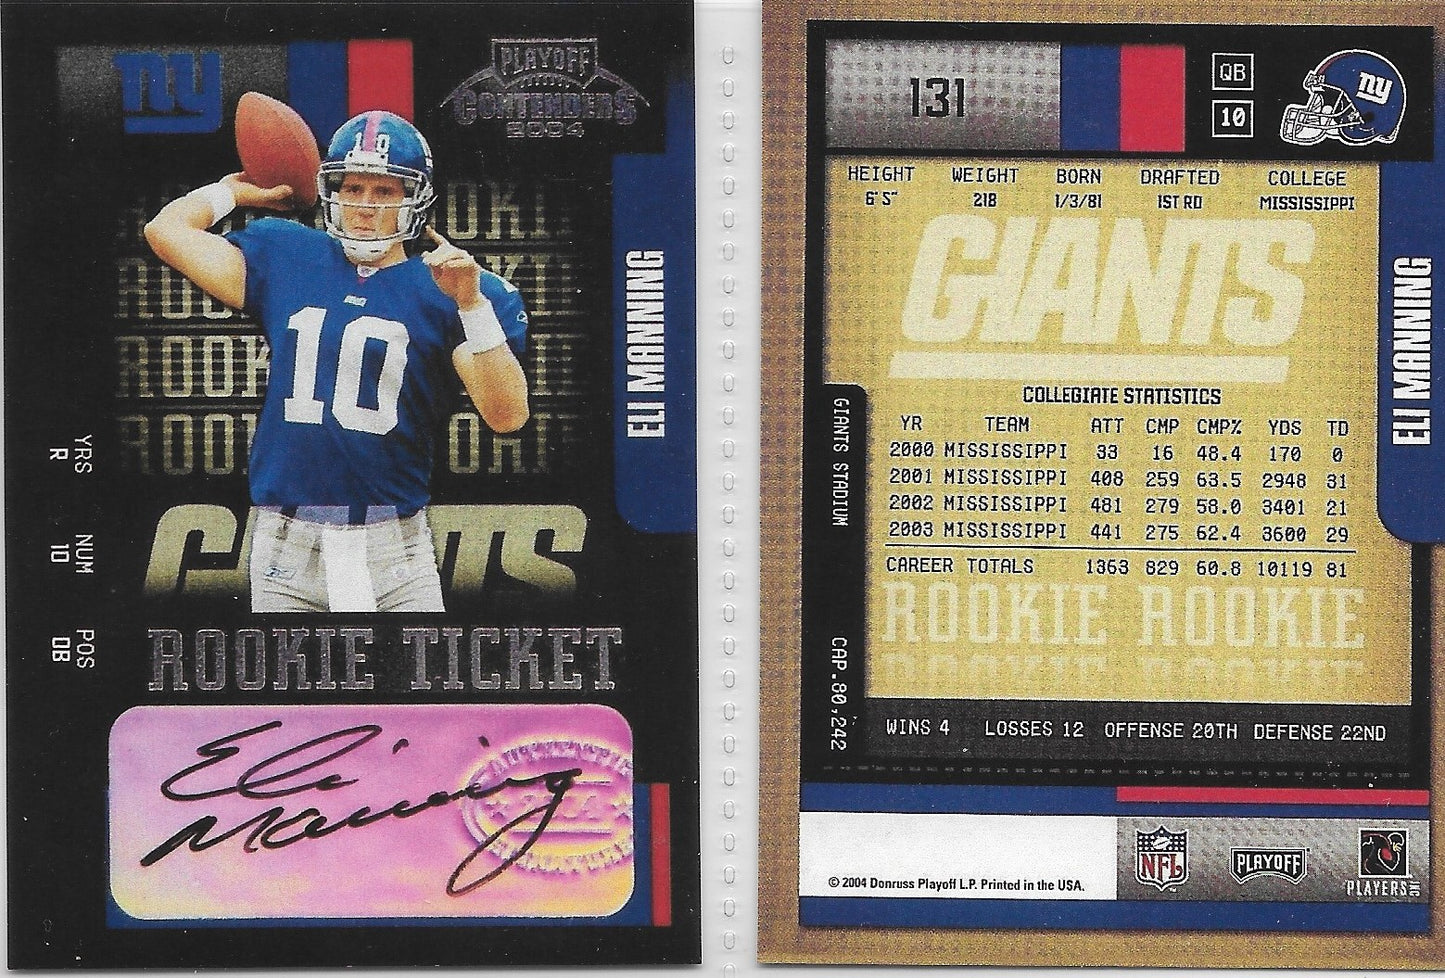 2004 playoff Contenders Eli Manning Playoff Ticket RP Card